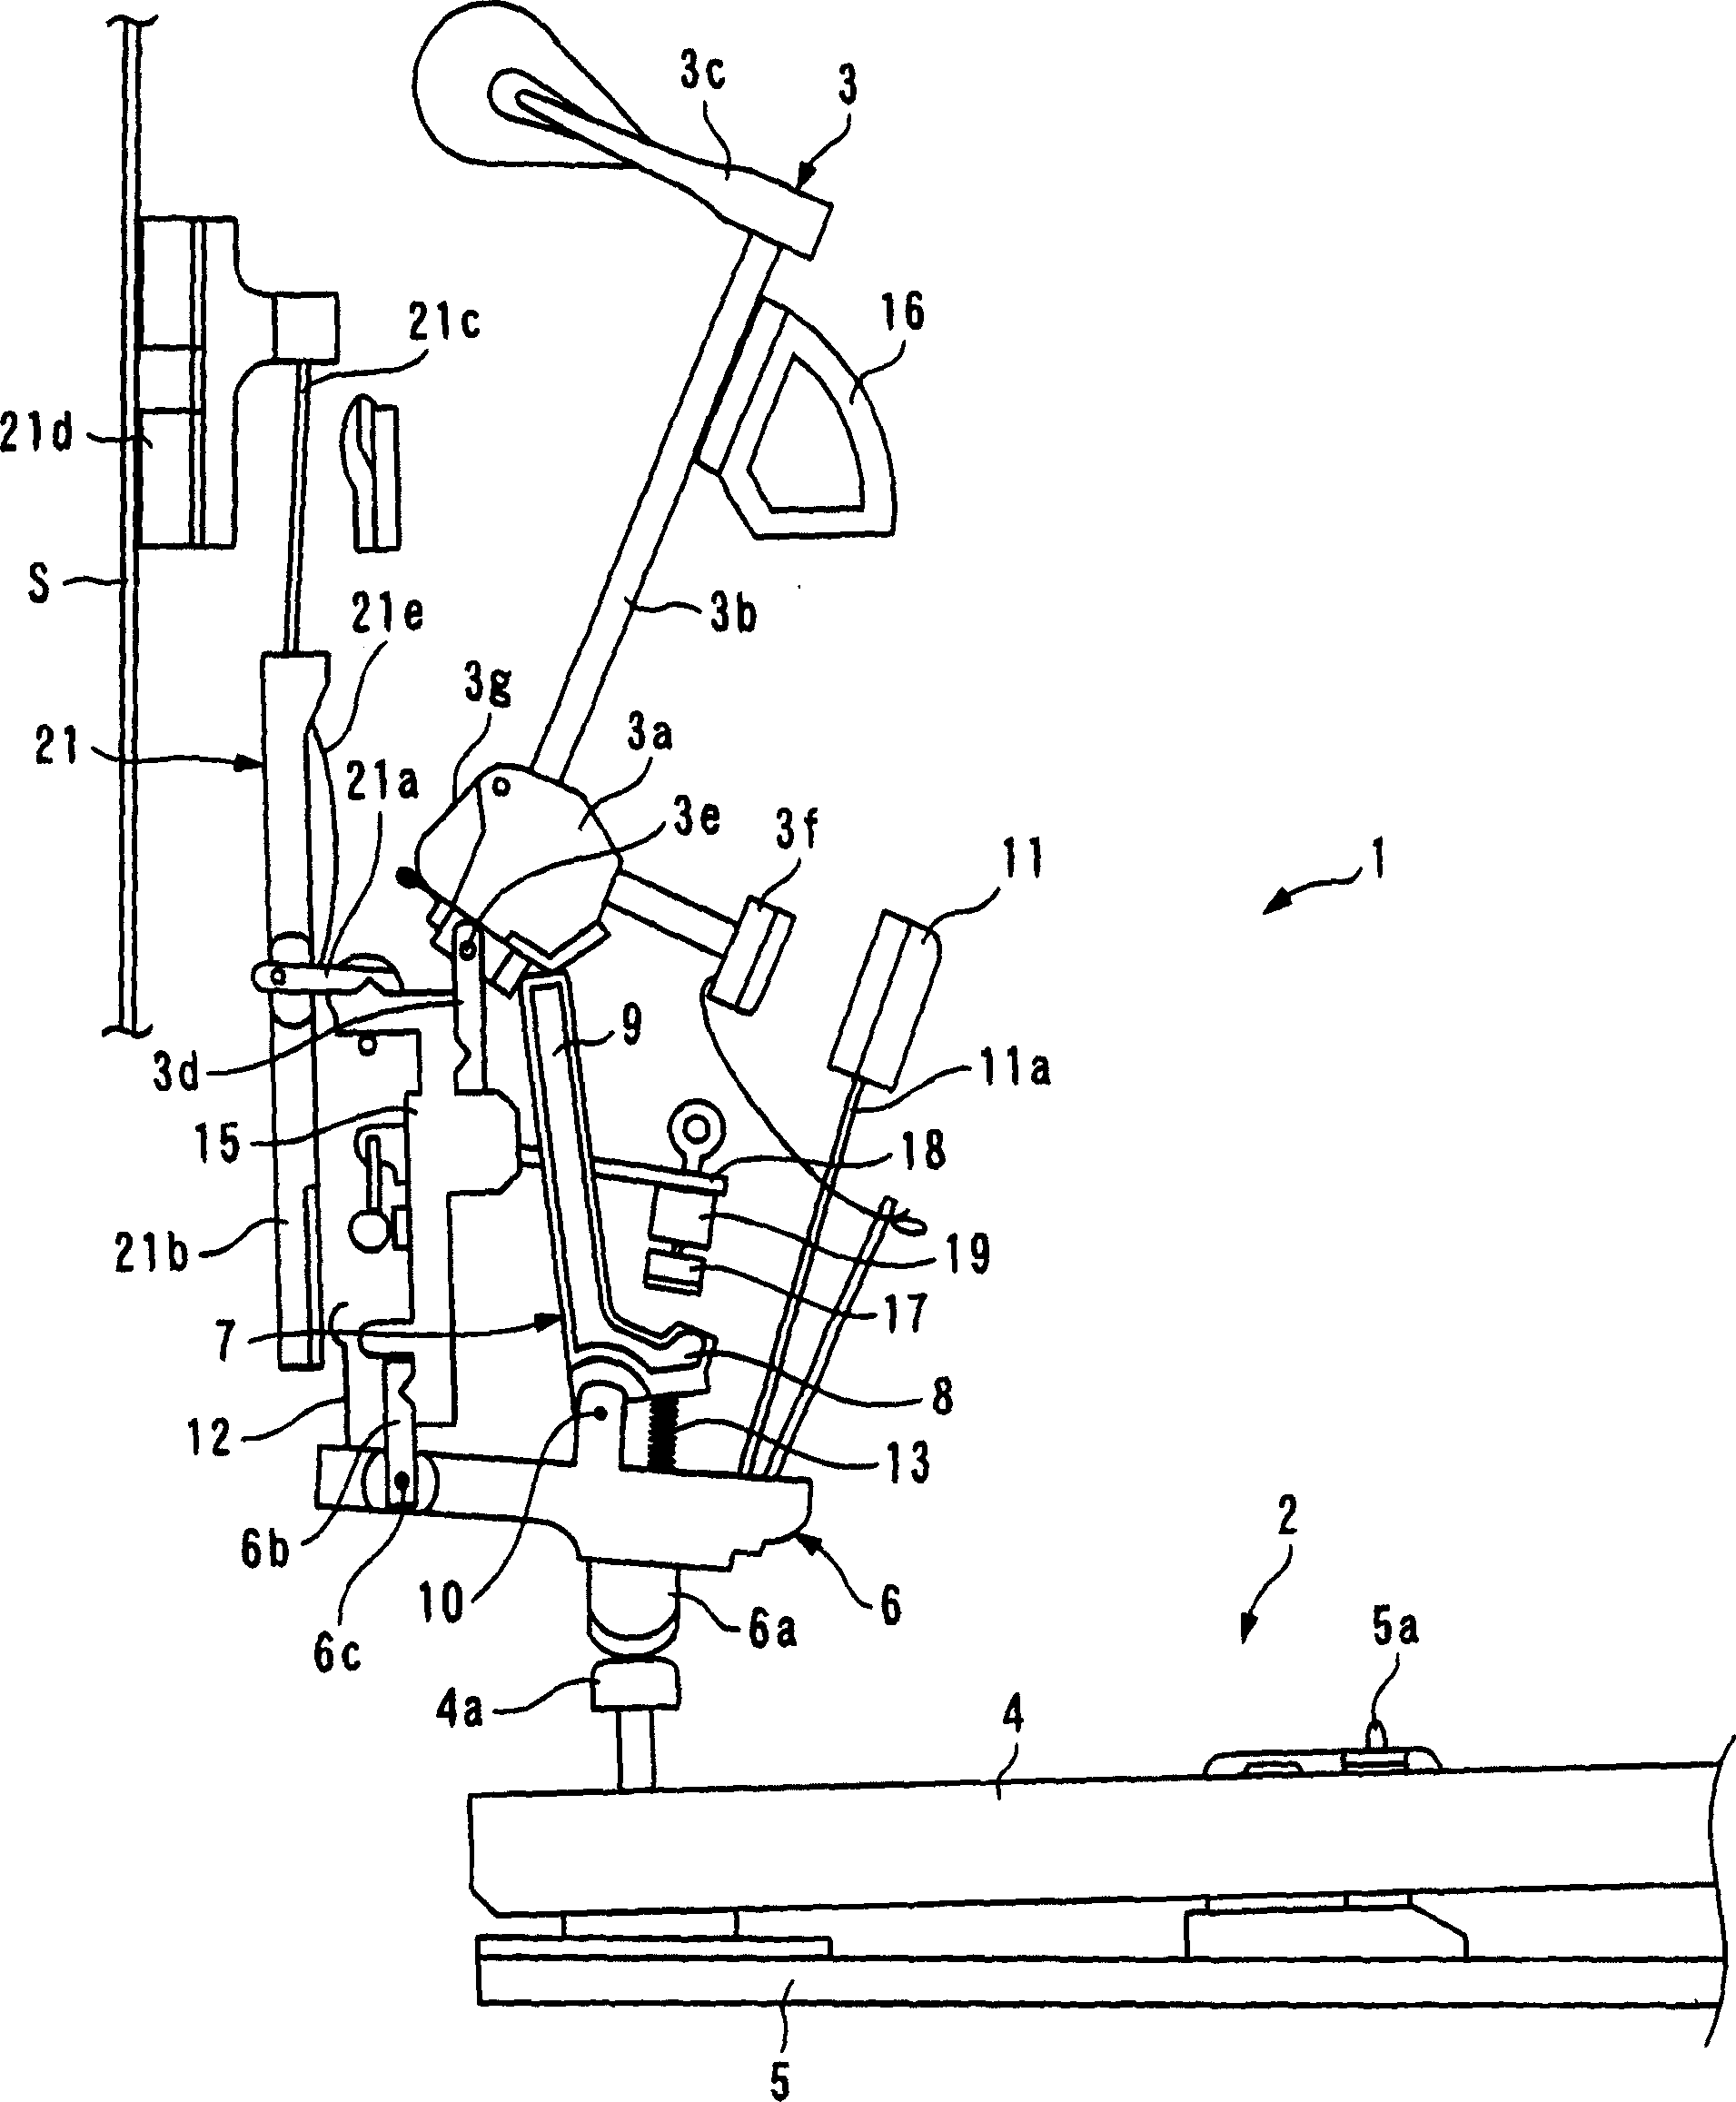 Mechanical device for piano